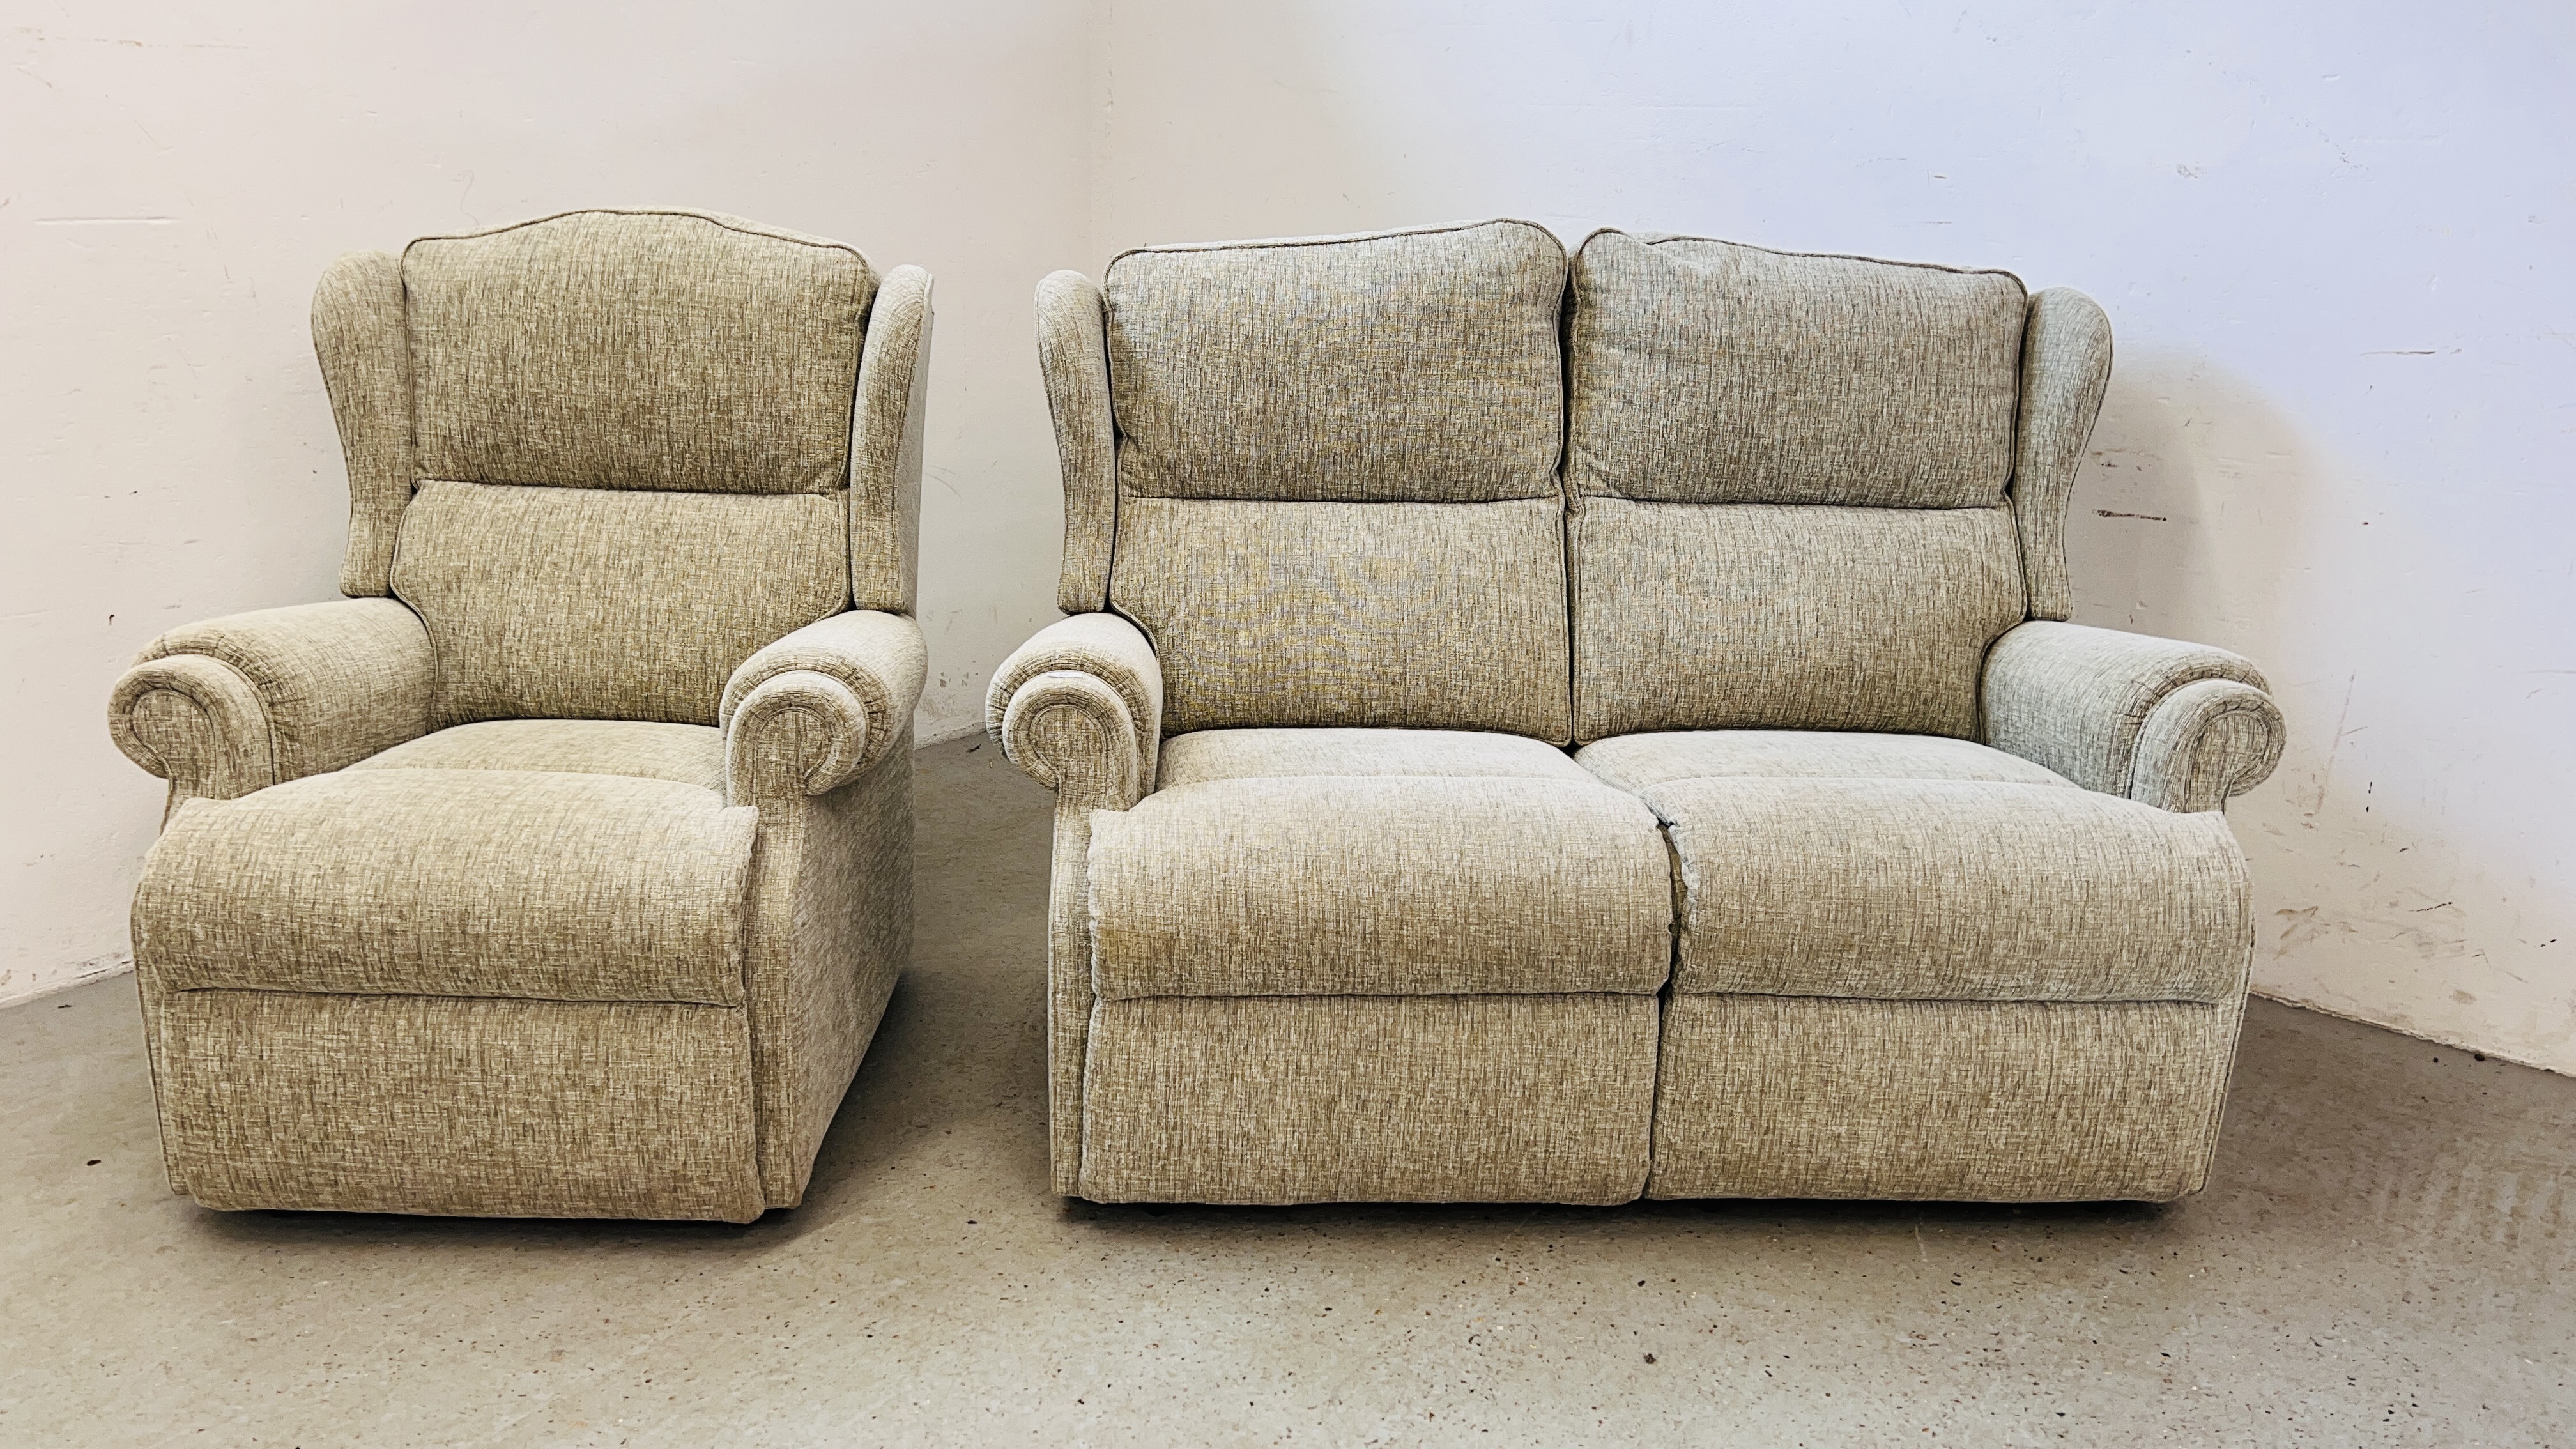 A GOOD QUALITY "SHERBORNE" TWO SEATER SOFA W 140CM X D 82CM X H 94CM ALONG WITH A MATCHING ARMCHAIR.